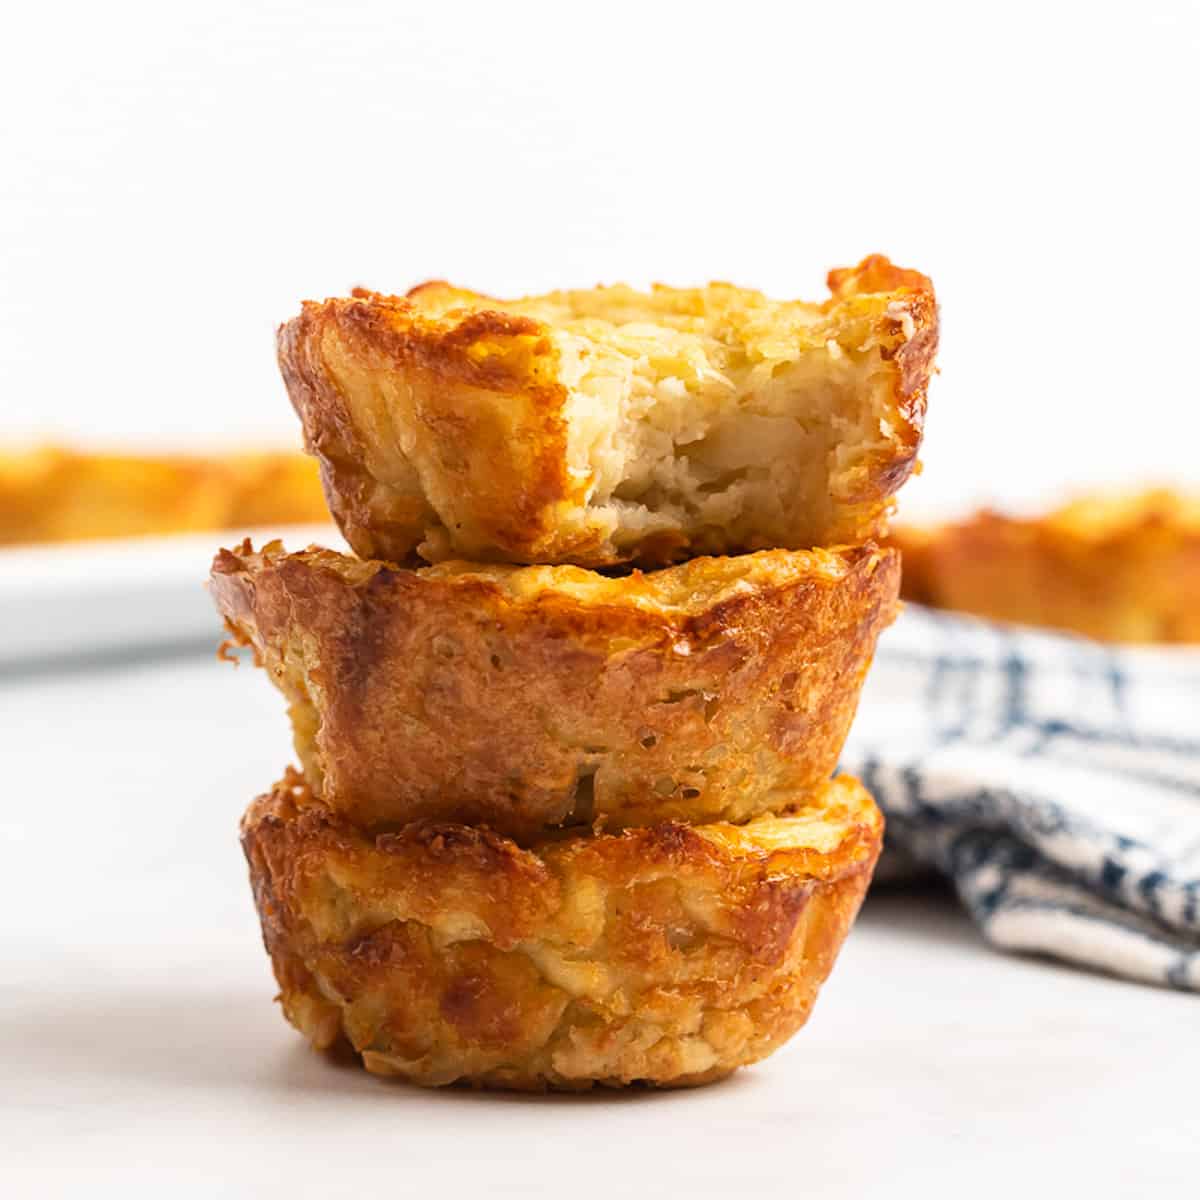 Stack of 3 potato latke muffins with a bite showing the inside.